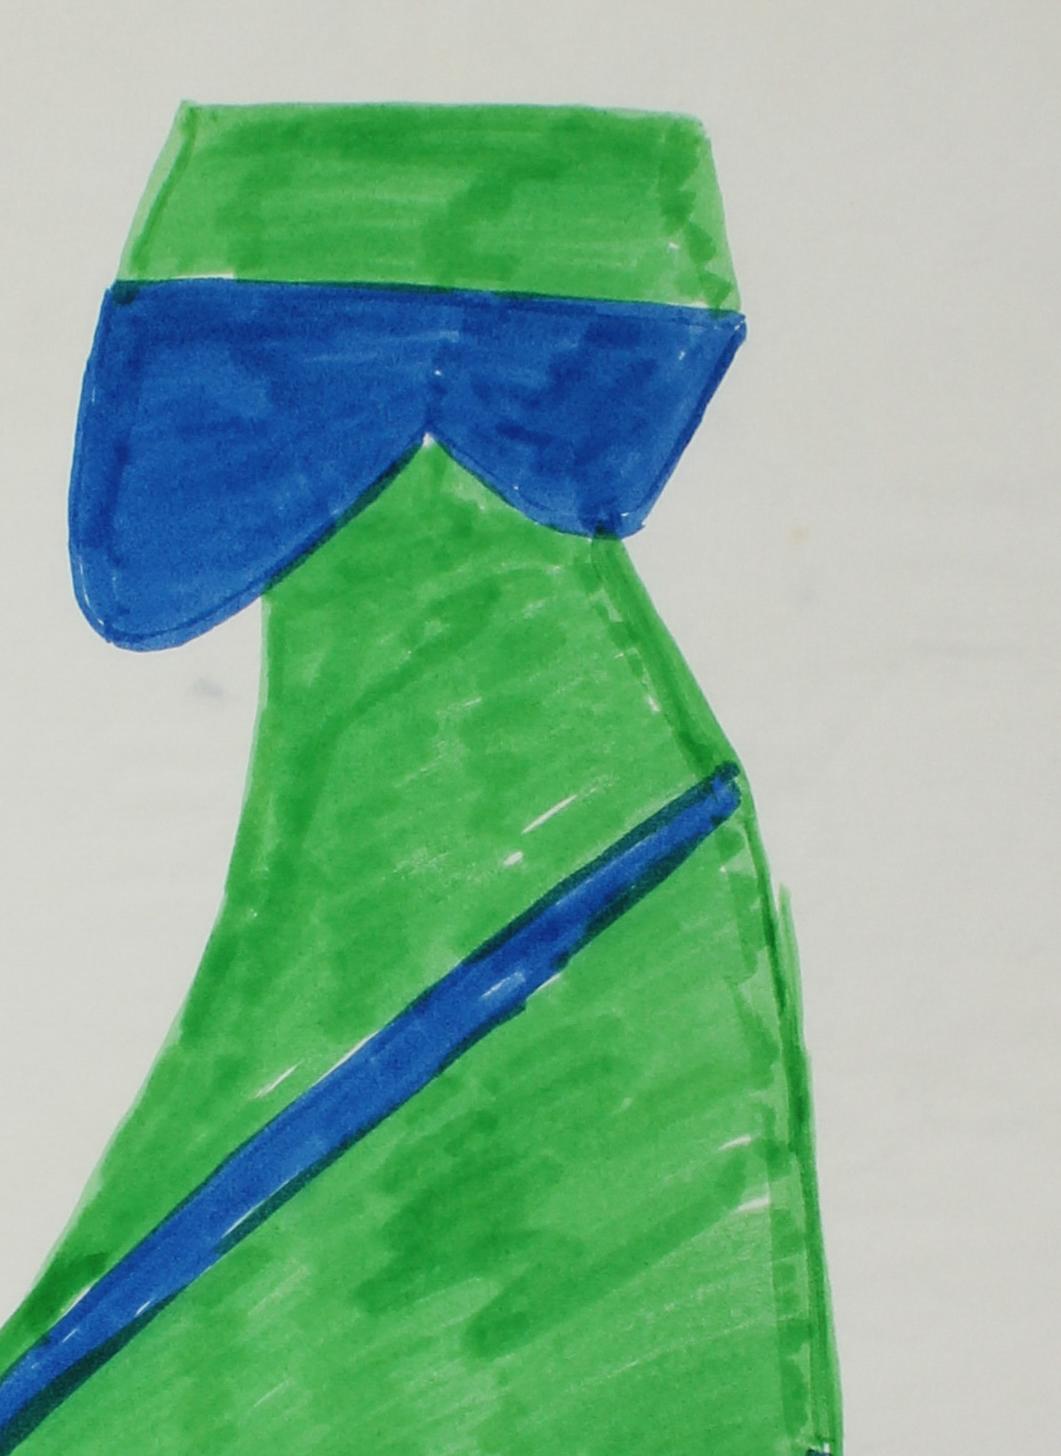 Figurative and Geometric Abstract in Blue and Green, Circa 1970 - Art by Dellard Cassity